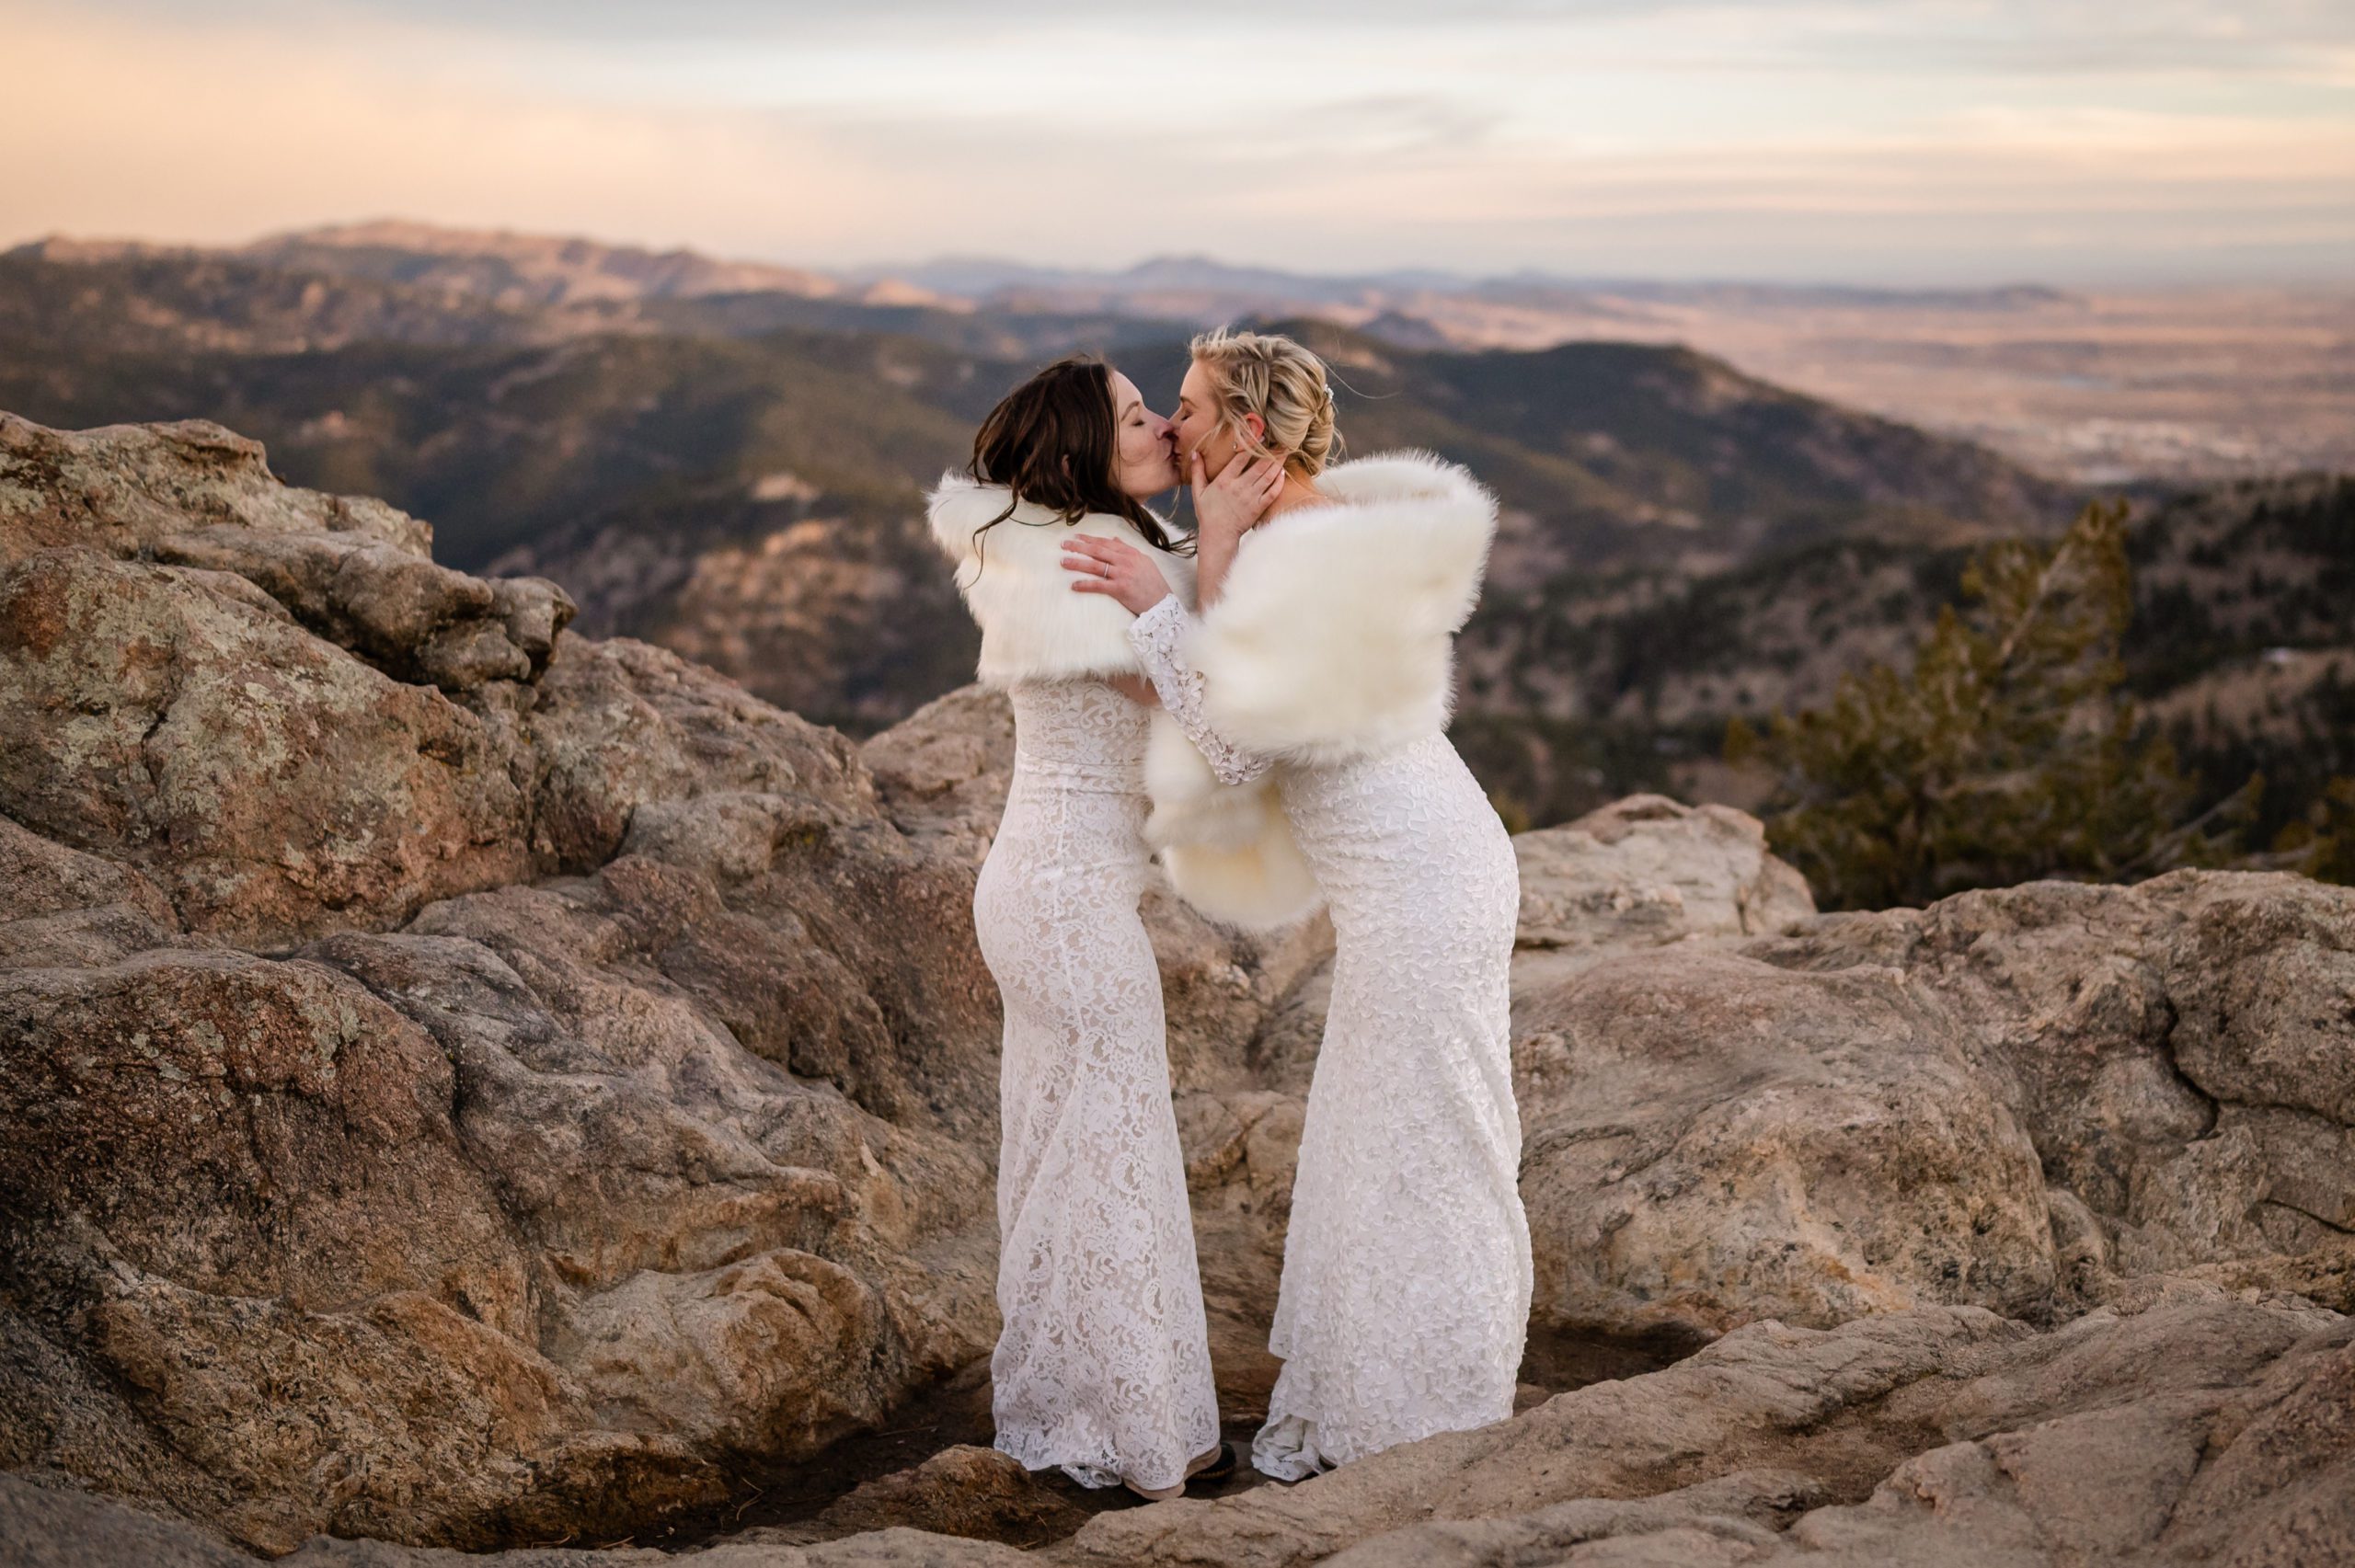 The bride's kissing at sunrise during their Lost Gulch elopement ceremony. 